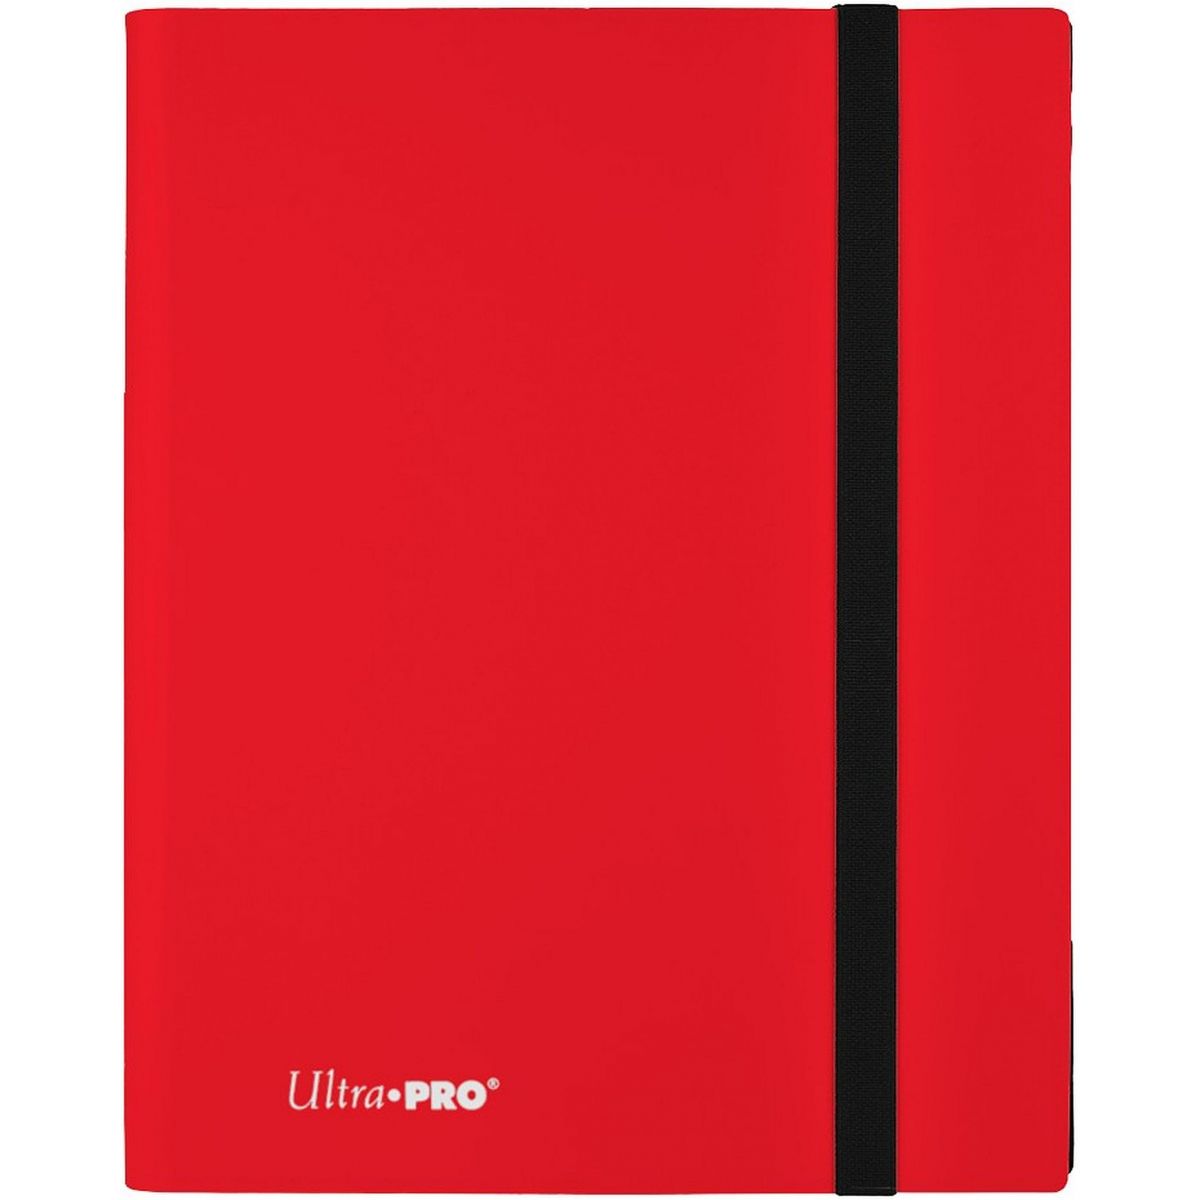 Ultra Pro - Pro Binder - Eclipse - 9 Cases - Rouge / Apple Red (360)